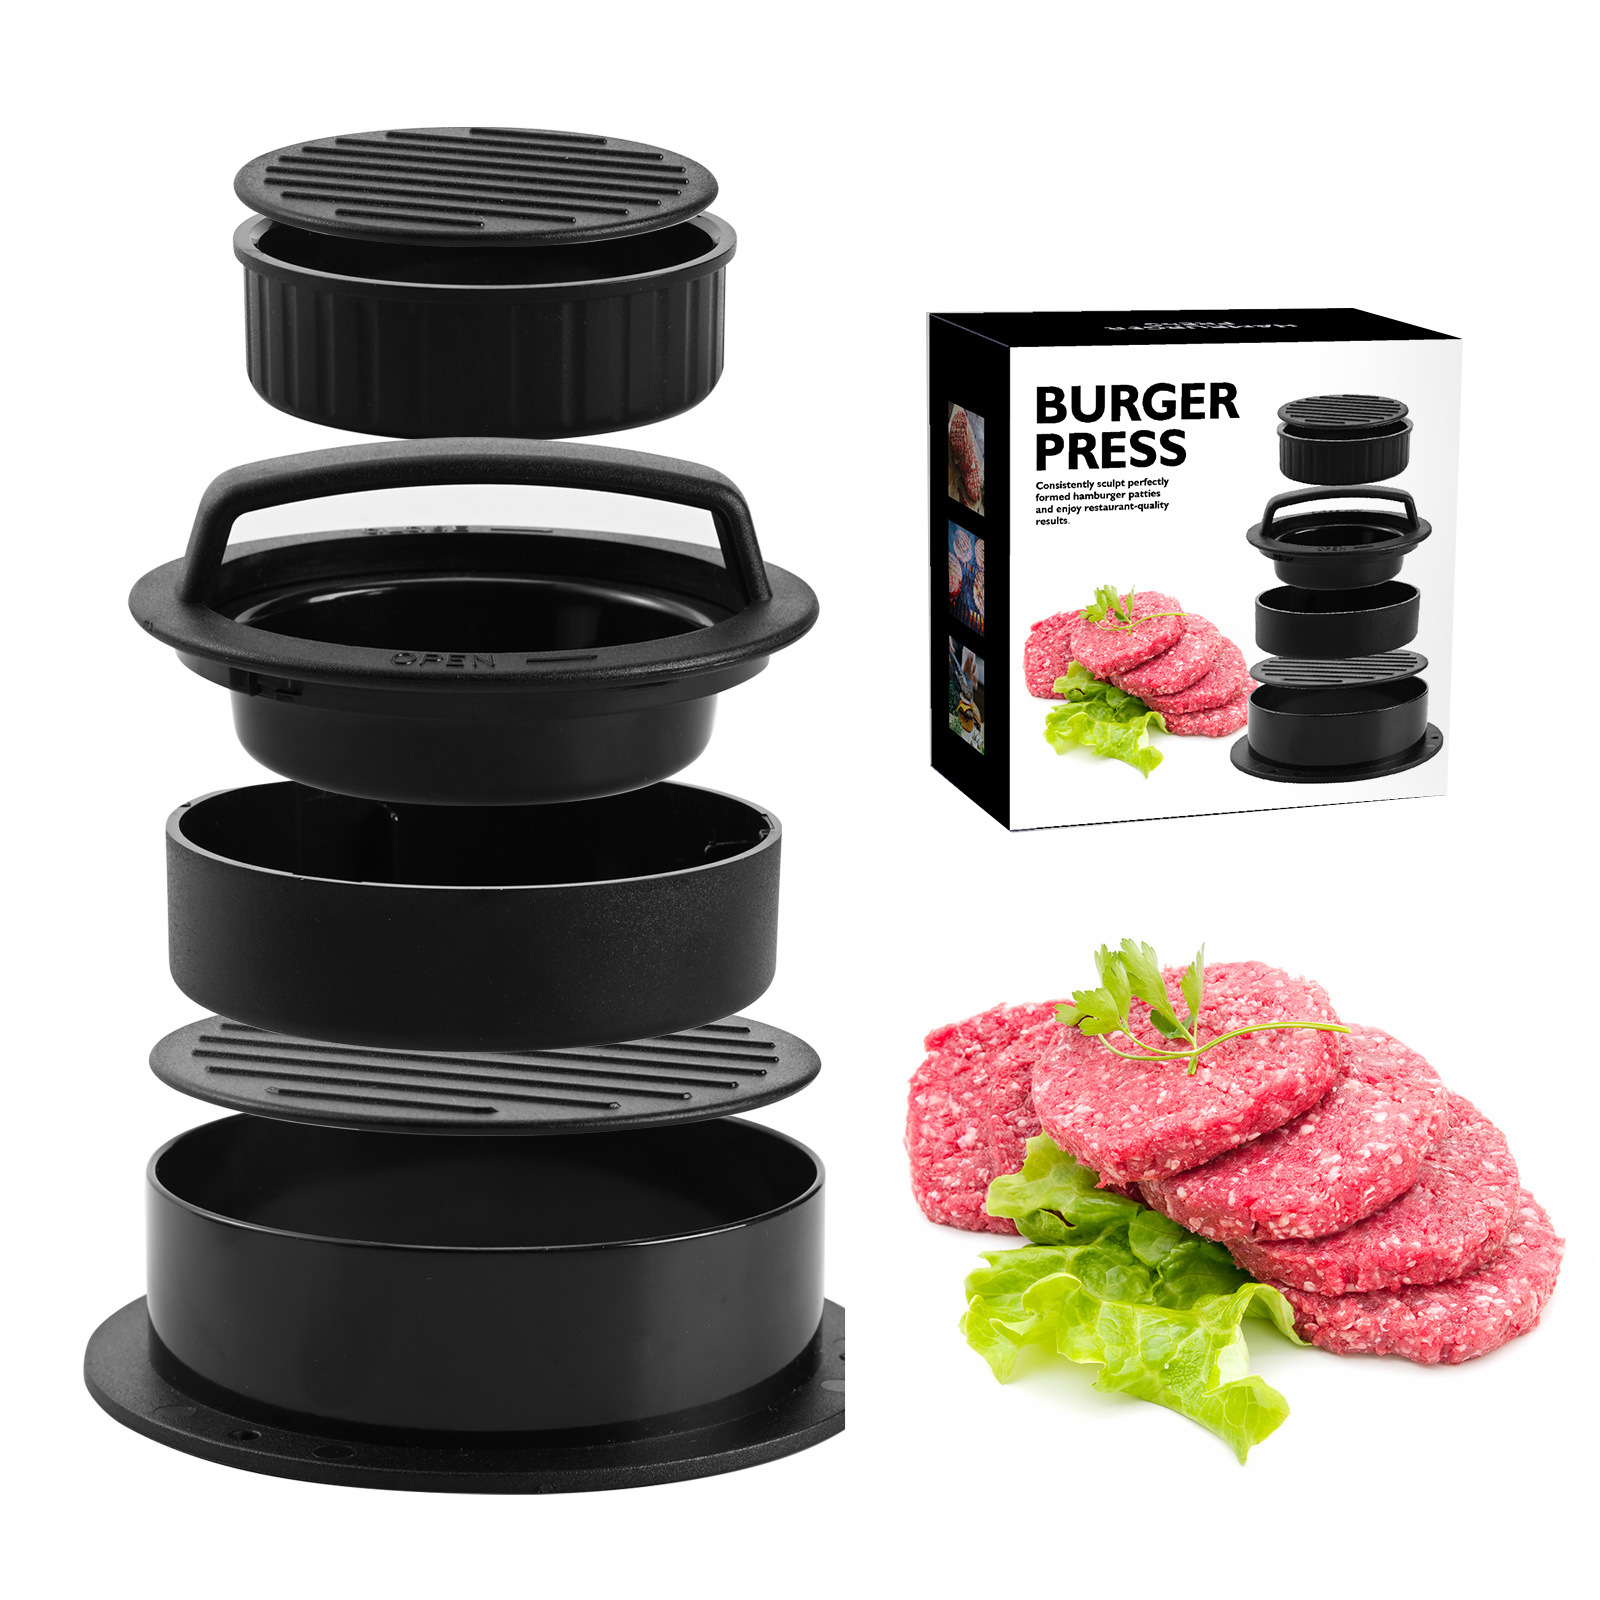 🔥Last Day Promotion - 50% OFF🔥3-in-1 Burger Press🔥Buy 2 items and save 10% off & Free Shipping